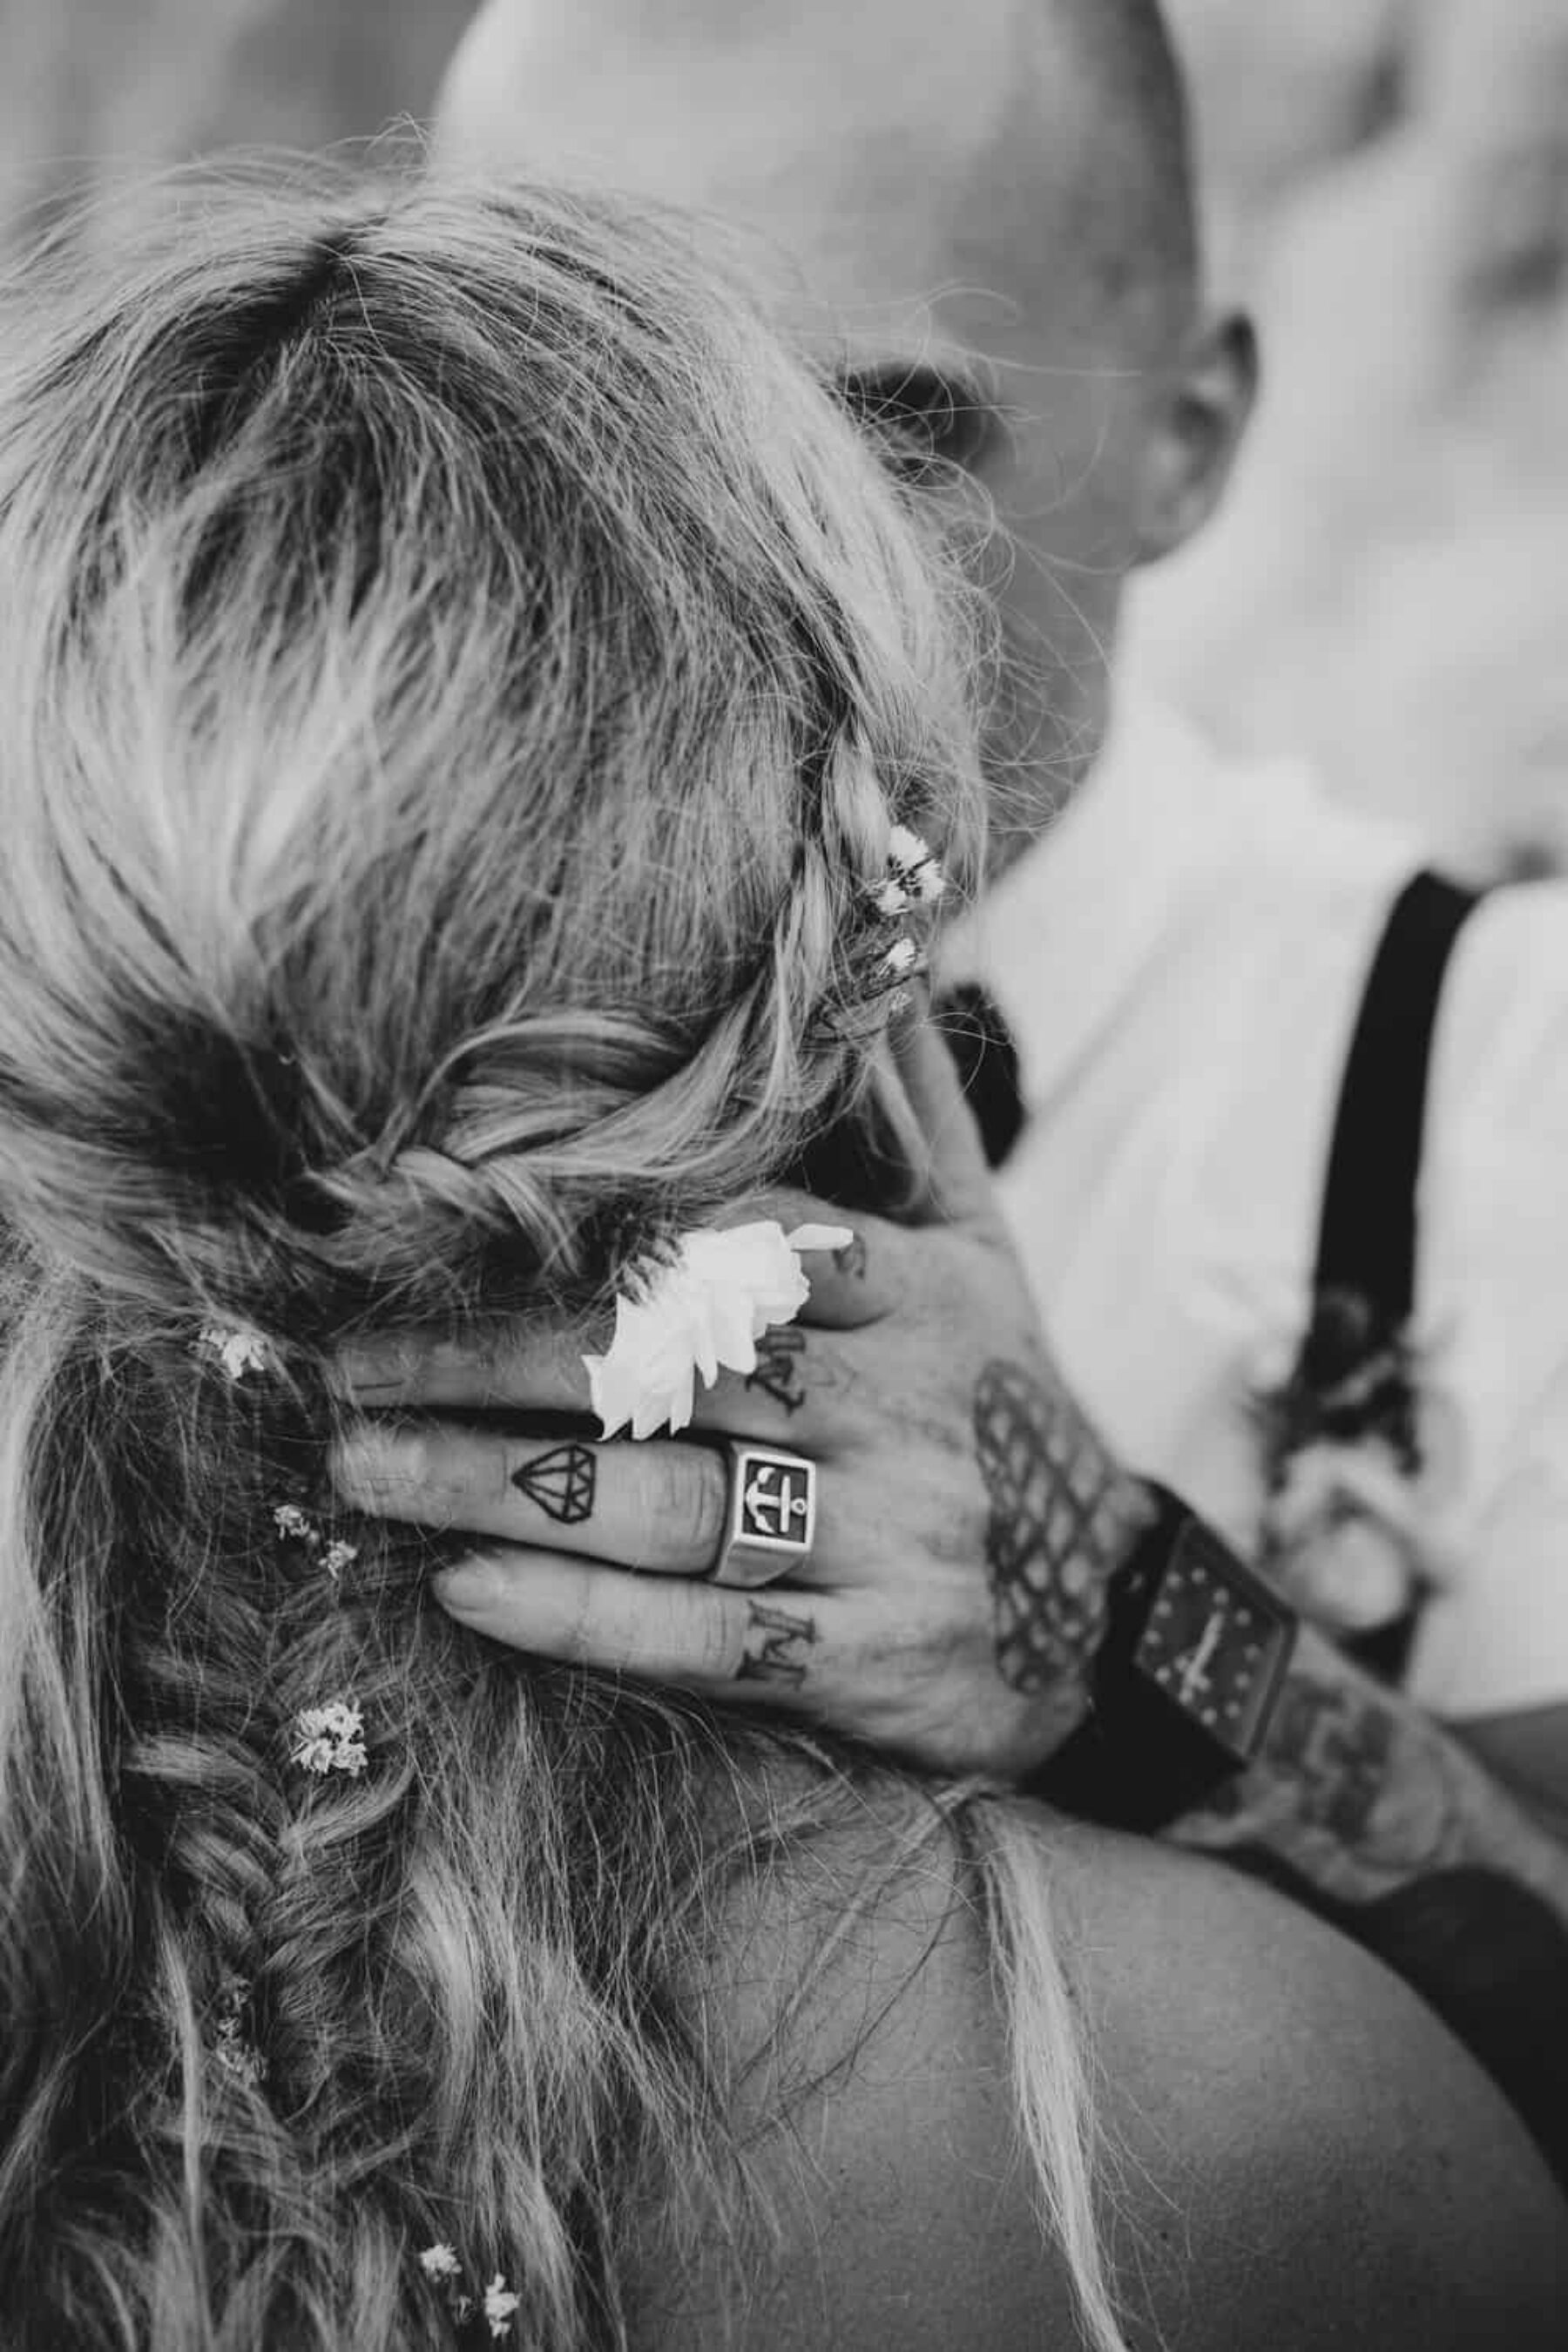 relaxed Byron Bay wedding fest - photography by Bonnie Jenkins